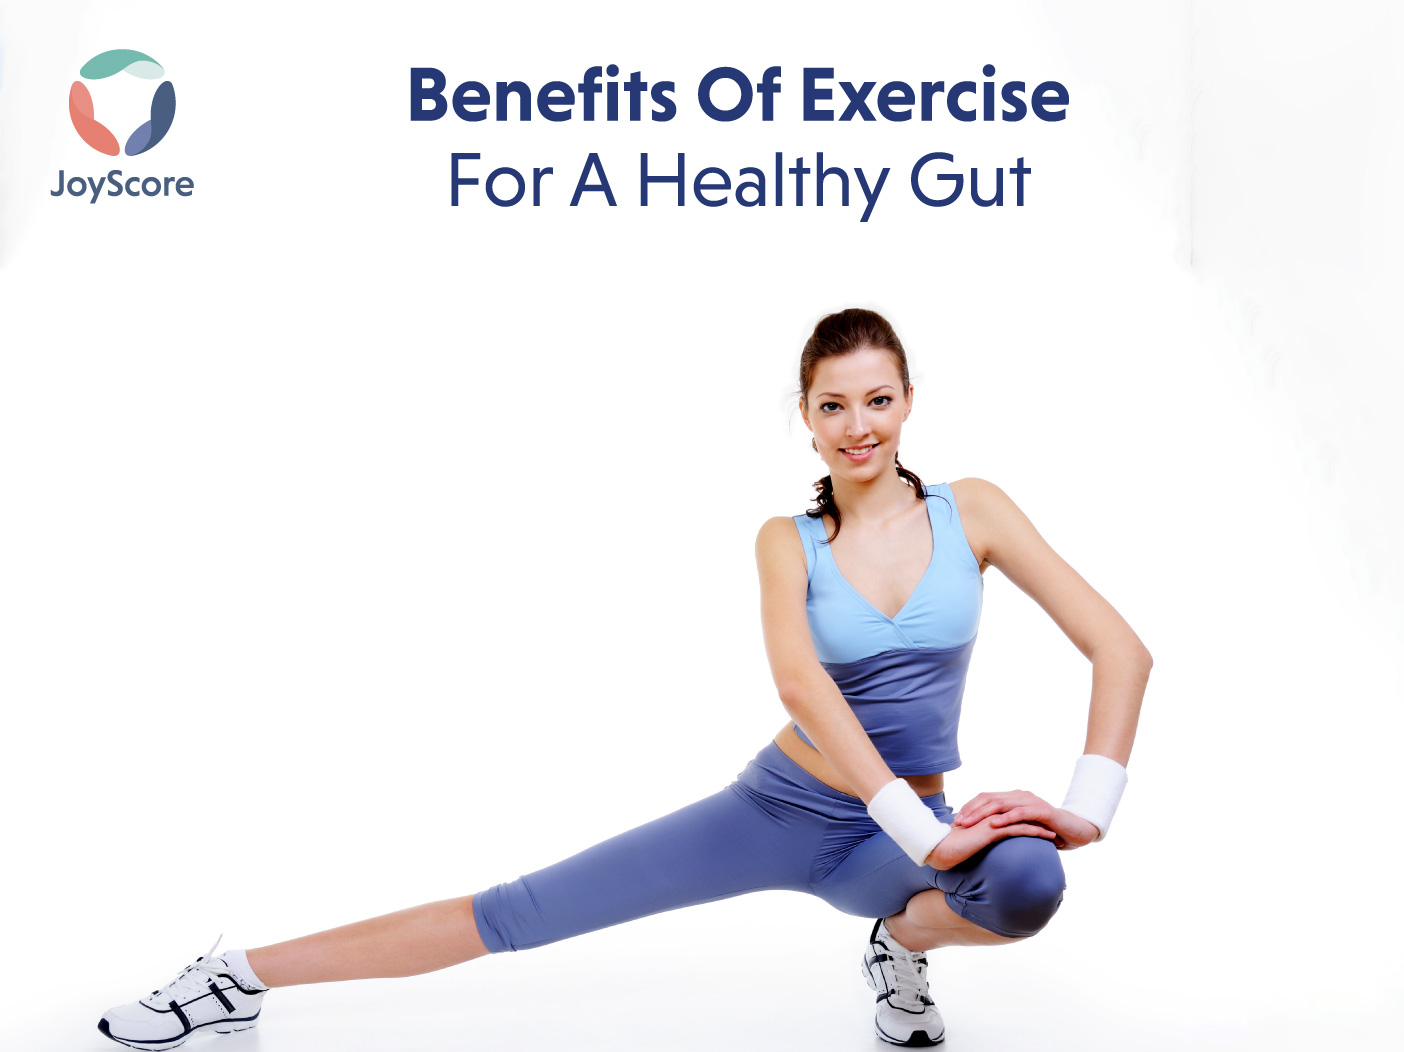 Benefits of Exercise for a Healthy Gut